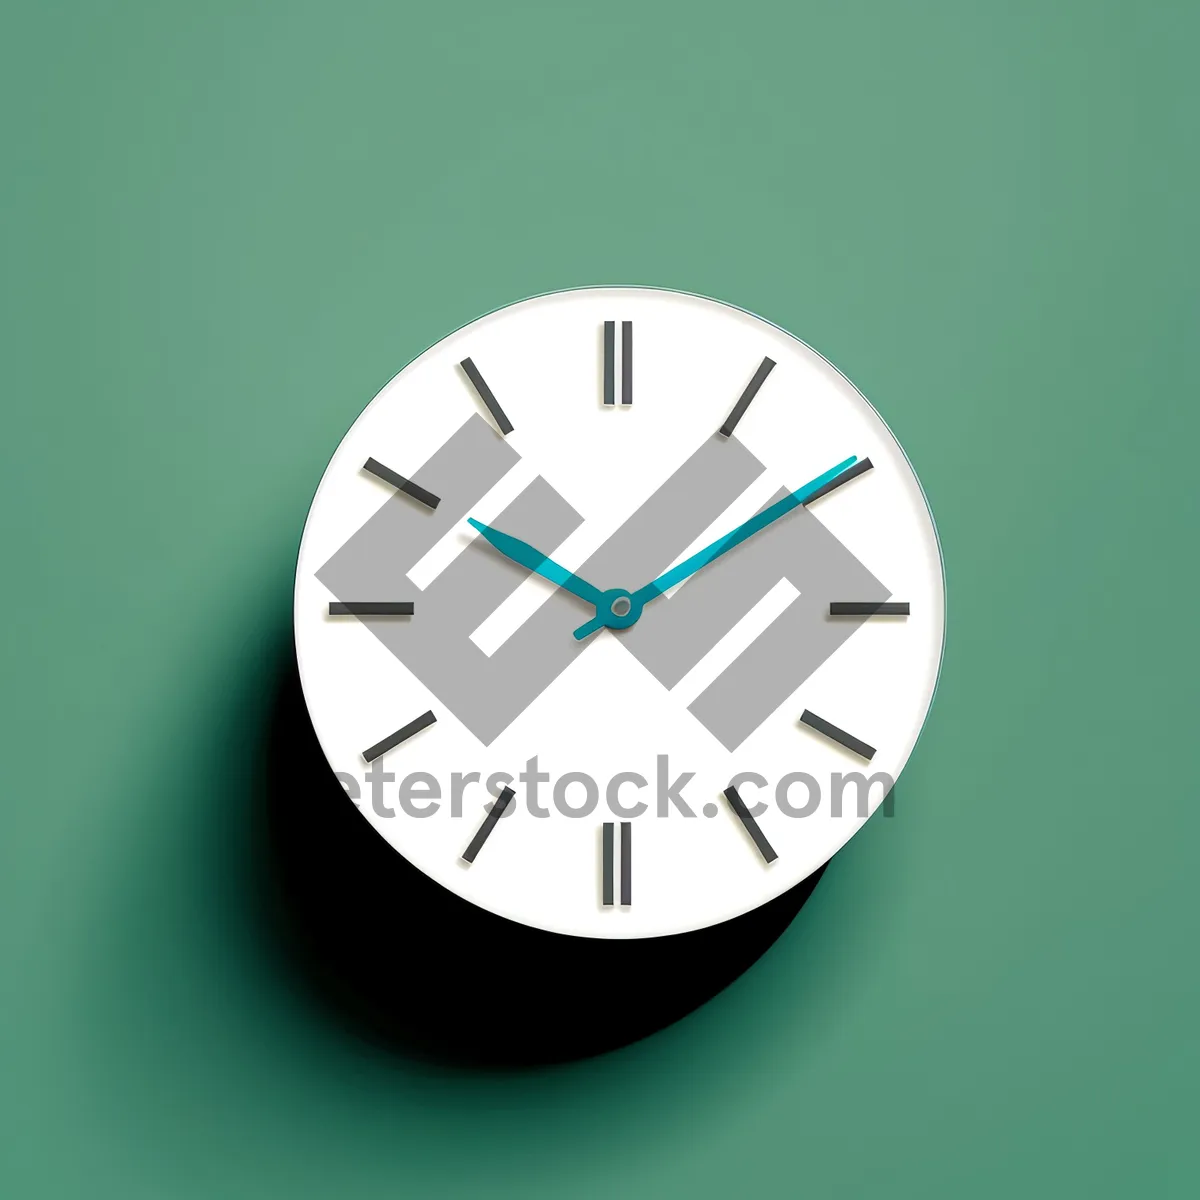 Picture of TimeTicker - Classic Wall Clock for Business Offices